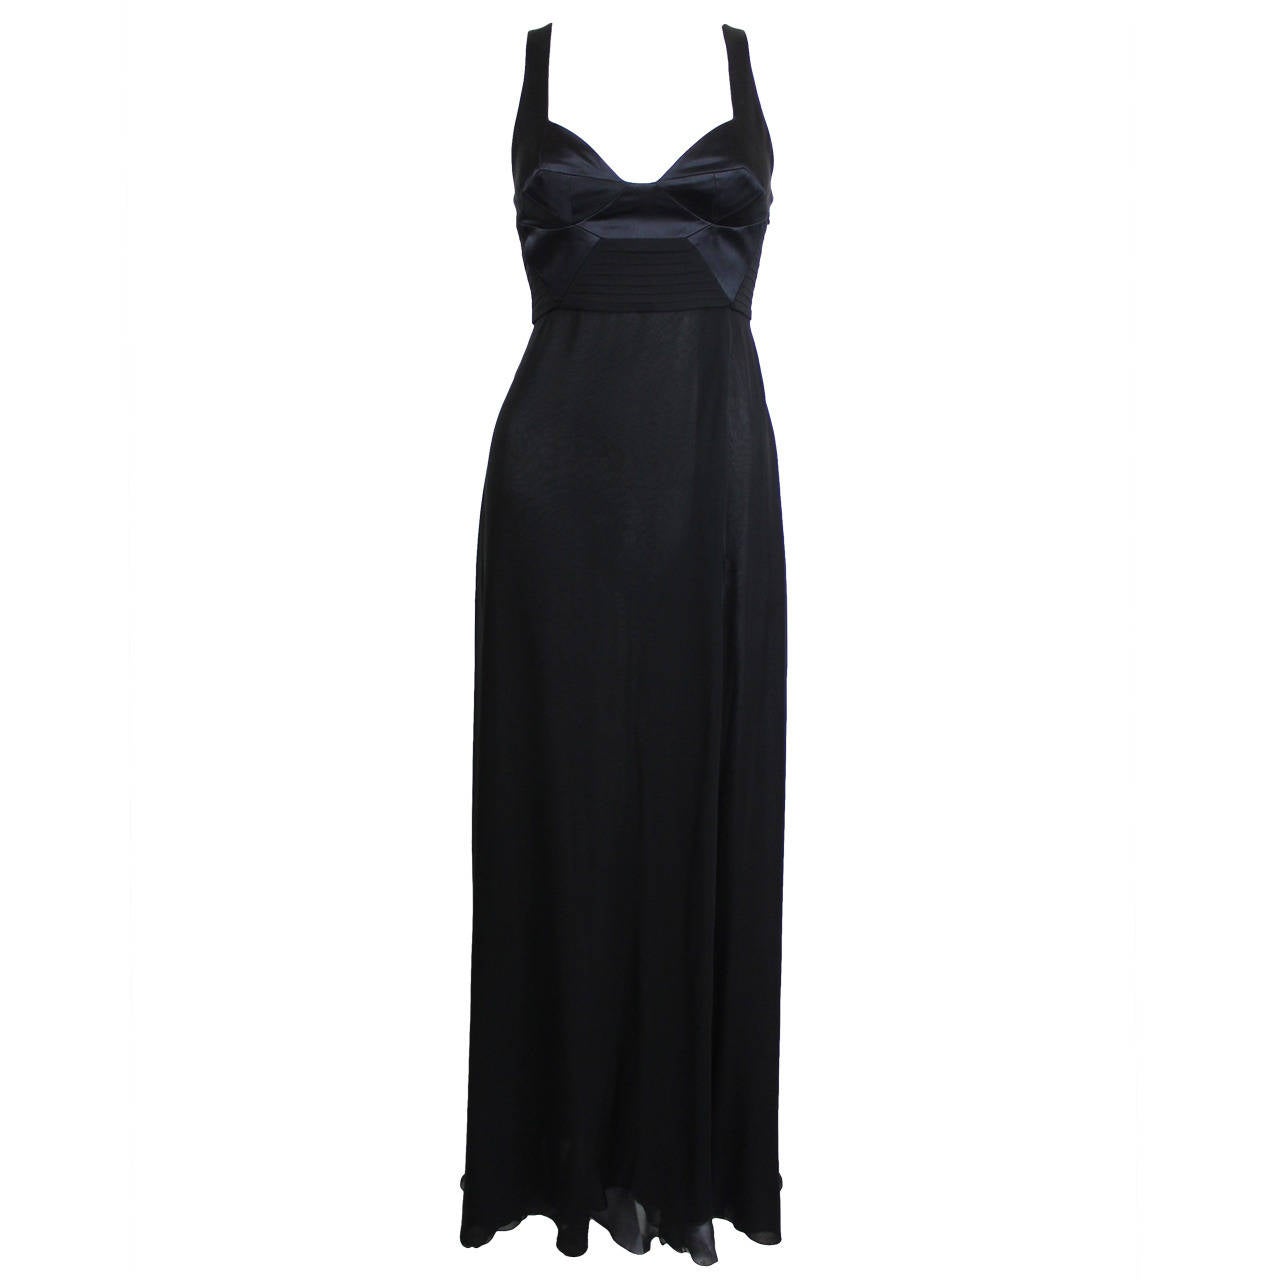 Versace Black Satin and Chiffon Evening Gown